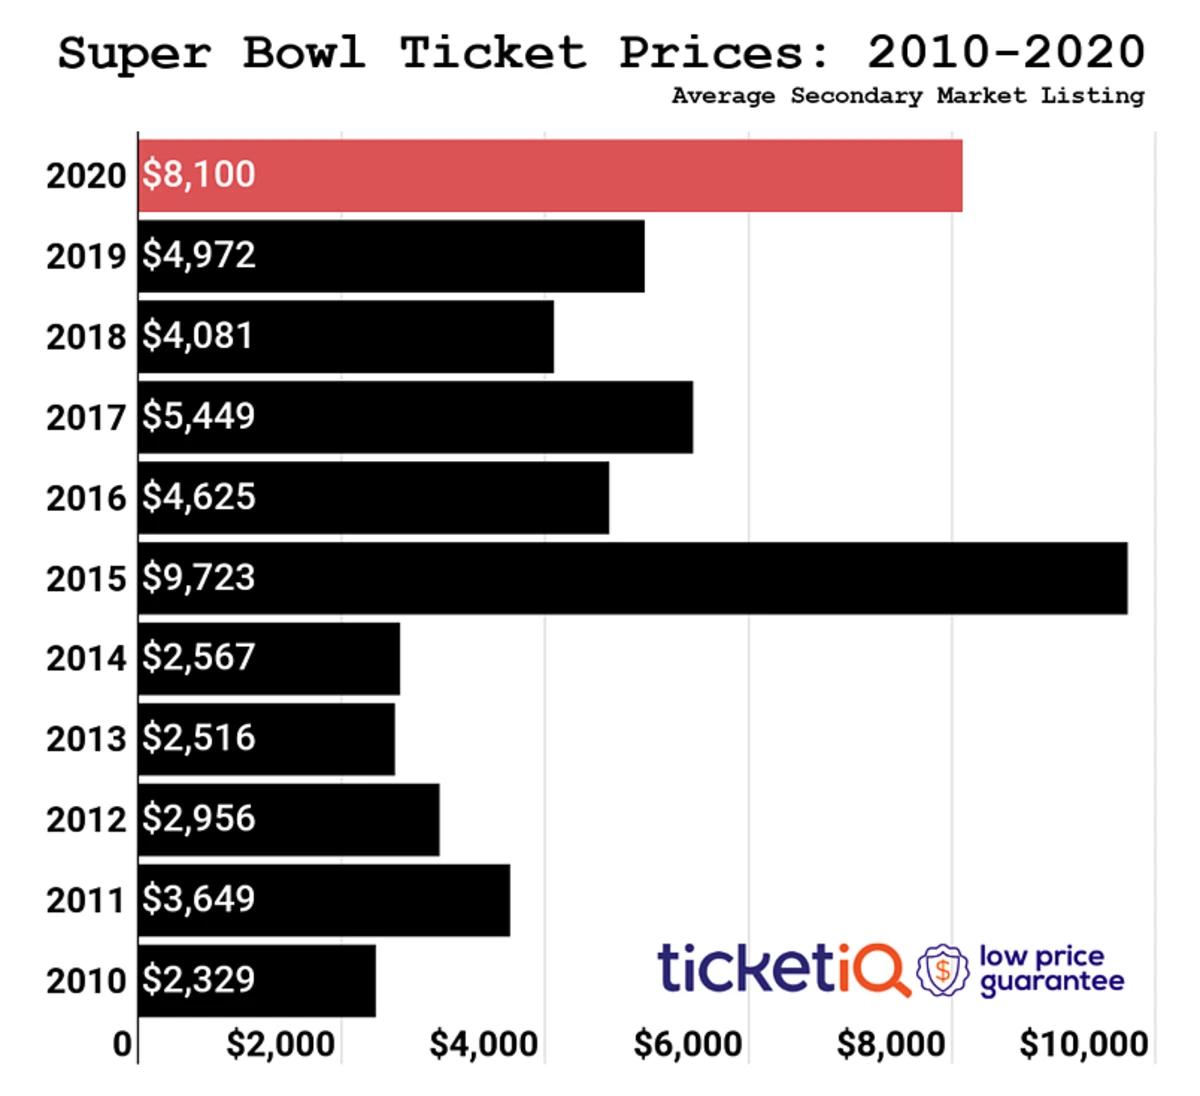 49ers-Chiefs: Super Bowl LIV is Second Most Expensive in History